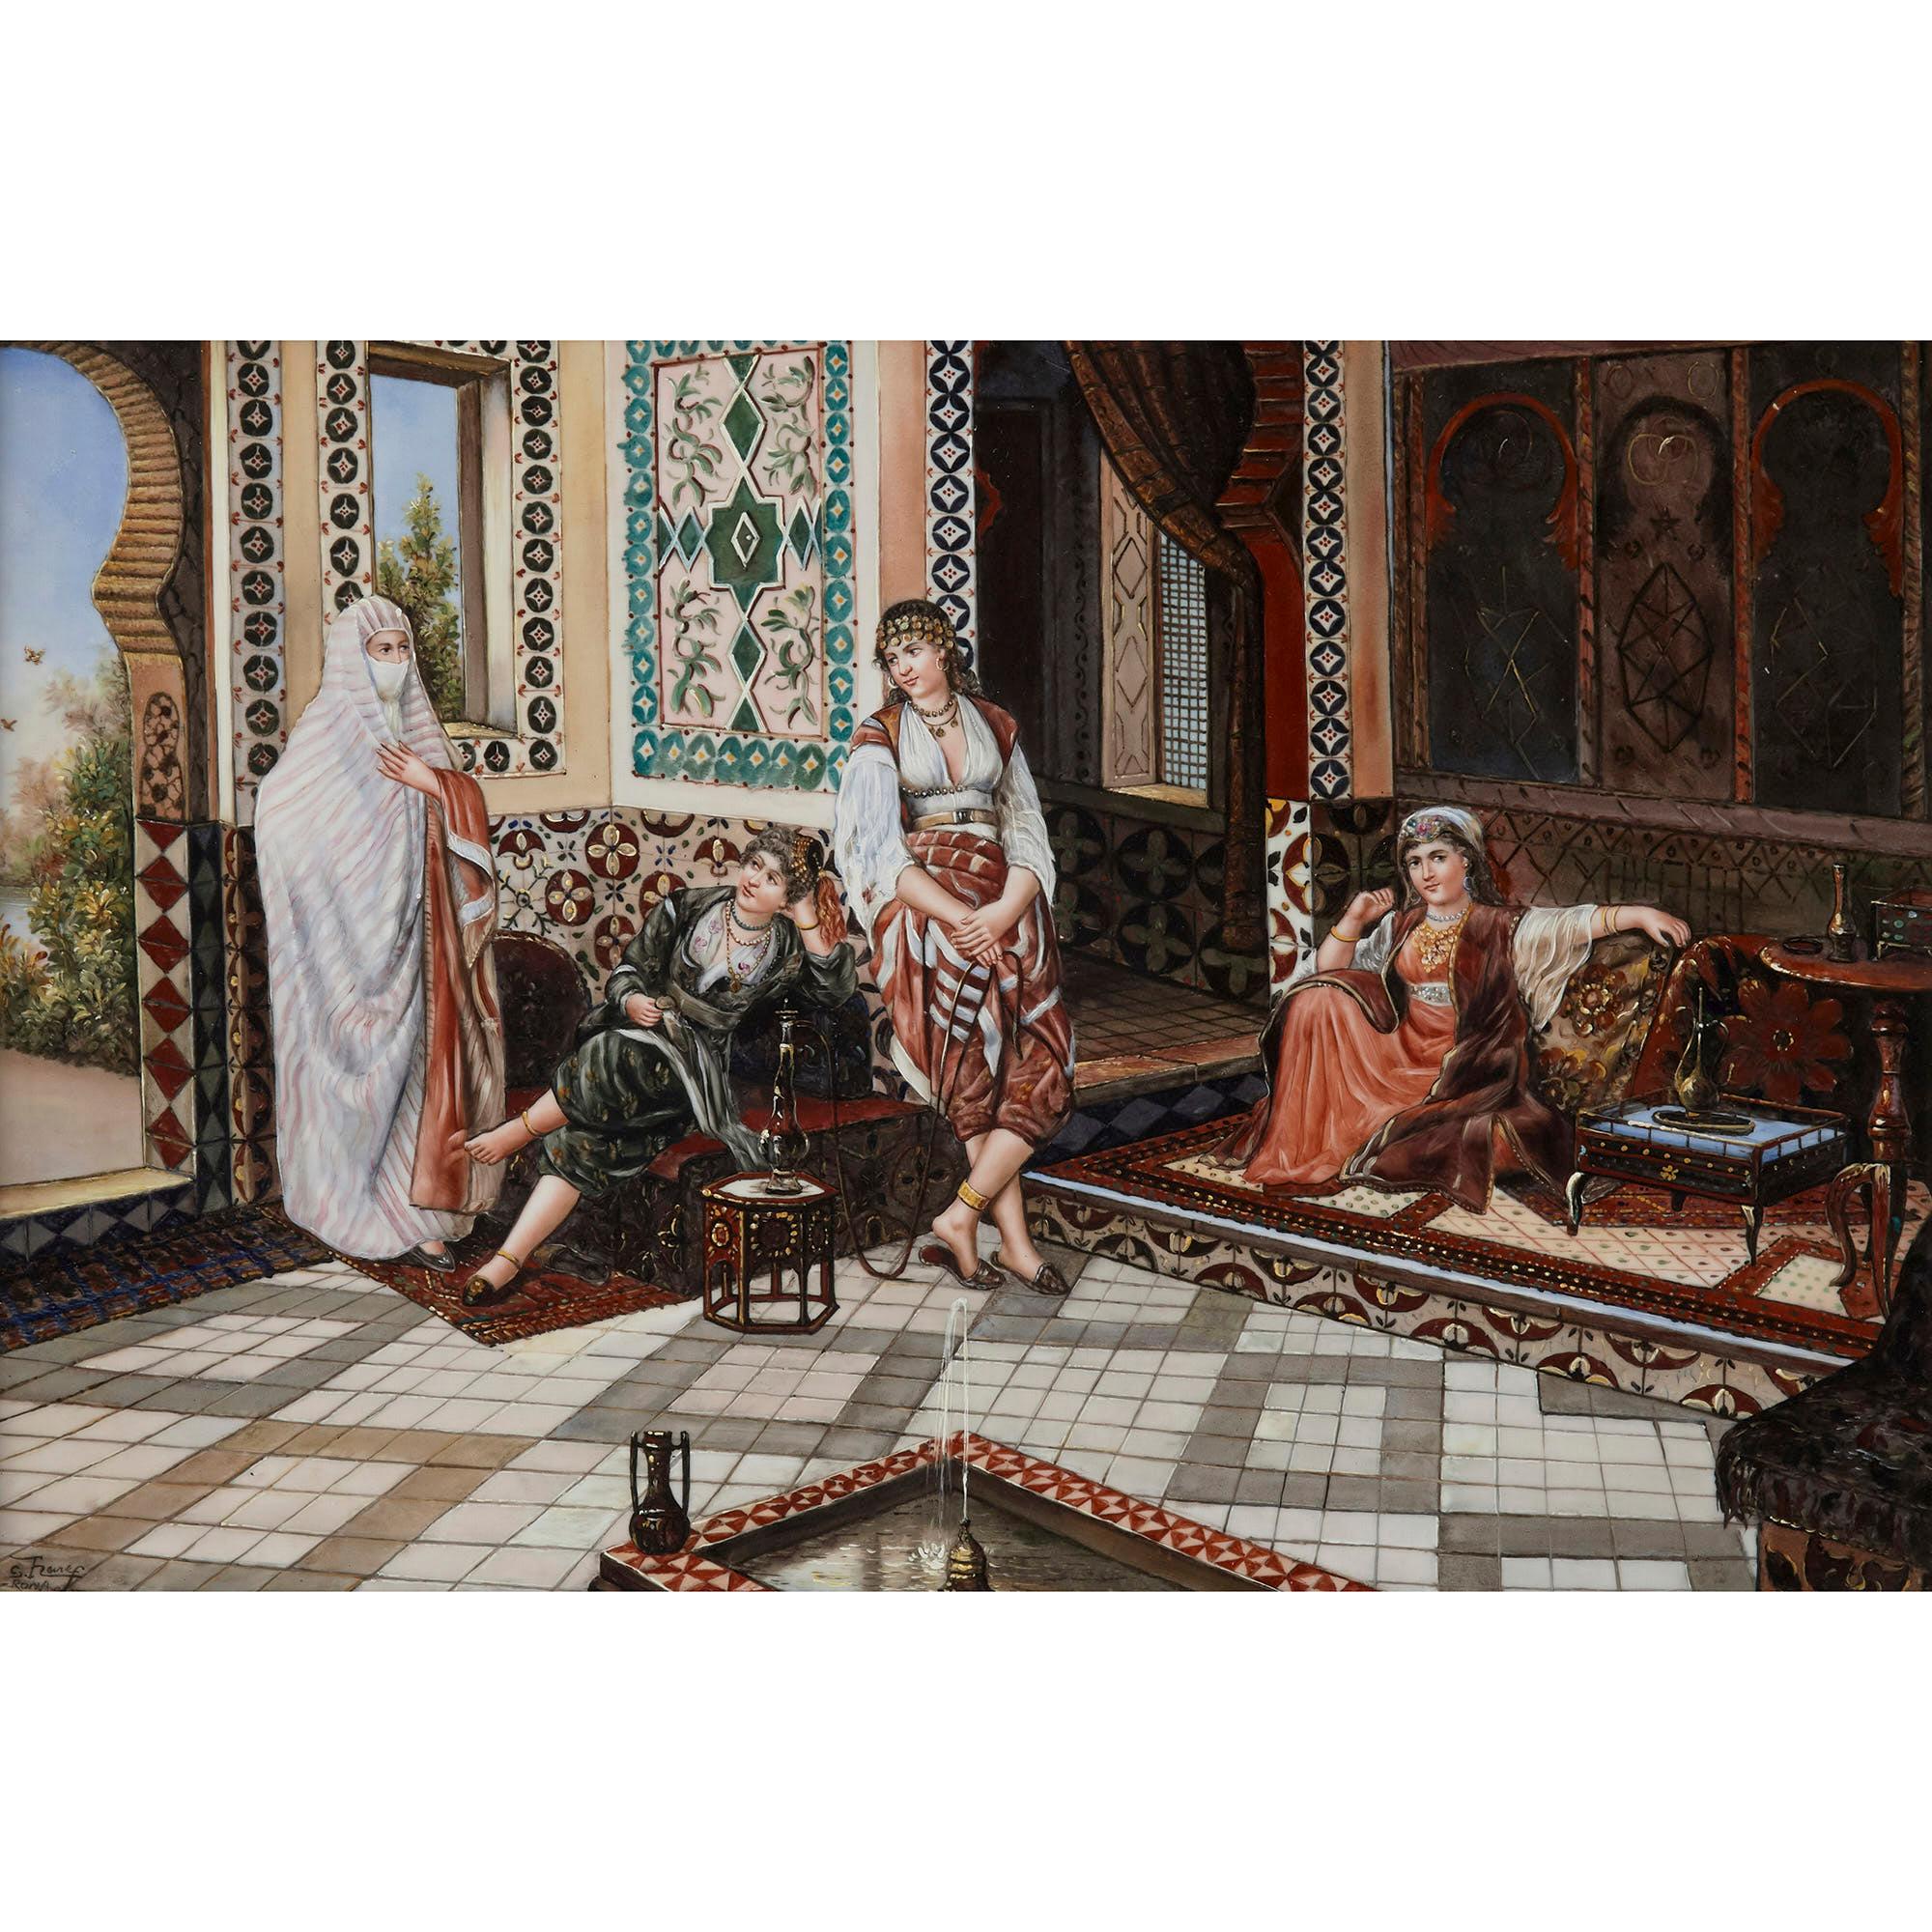 Orientalist porcelain plaque in the manner of KPM
German, 20th century
measures: Frame: Height 54cm, width 74cm, depth 3cm
Plaque: Height 40cm, width 60cm, depth 0.5cm

This fine and exceptionally large porcelain plaque is painted with an